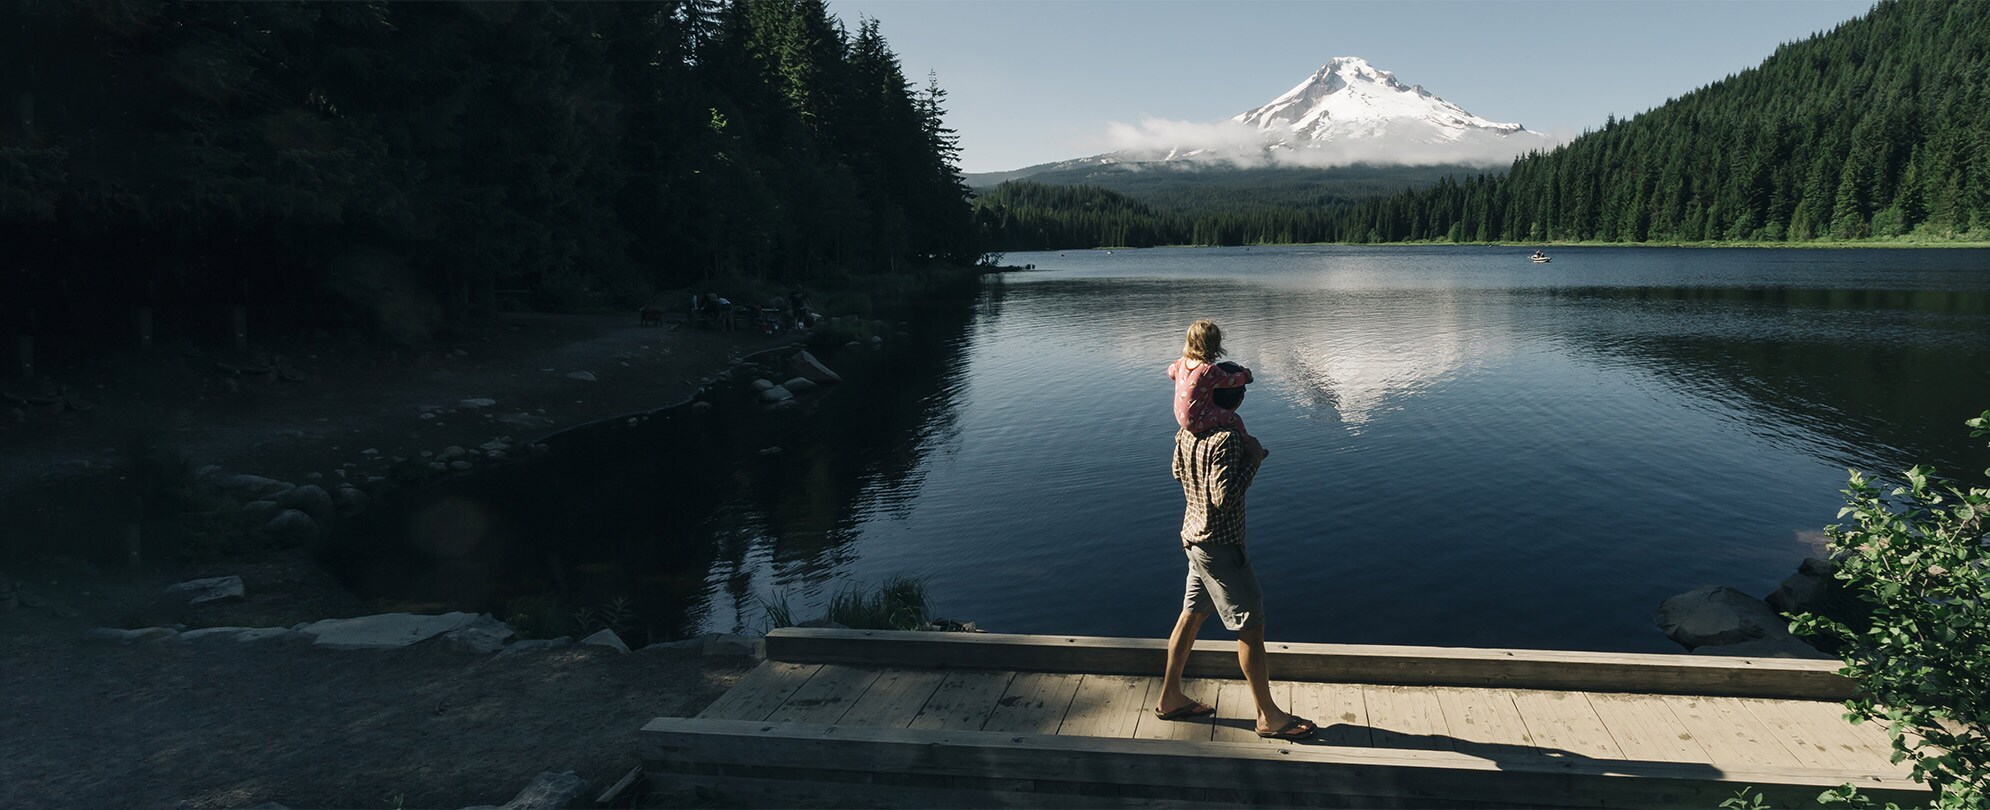 A dad holds a child on his shoulders in front of a Pacific Northwest lake with a mountain in the distance.